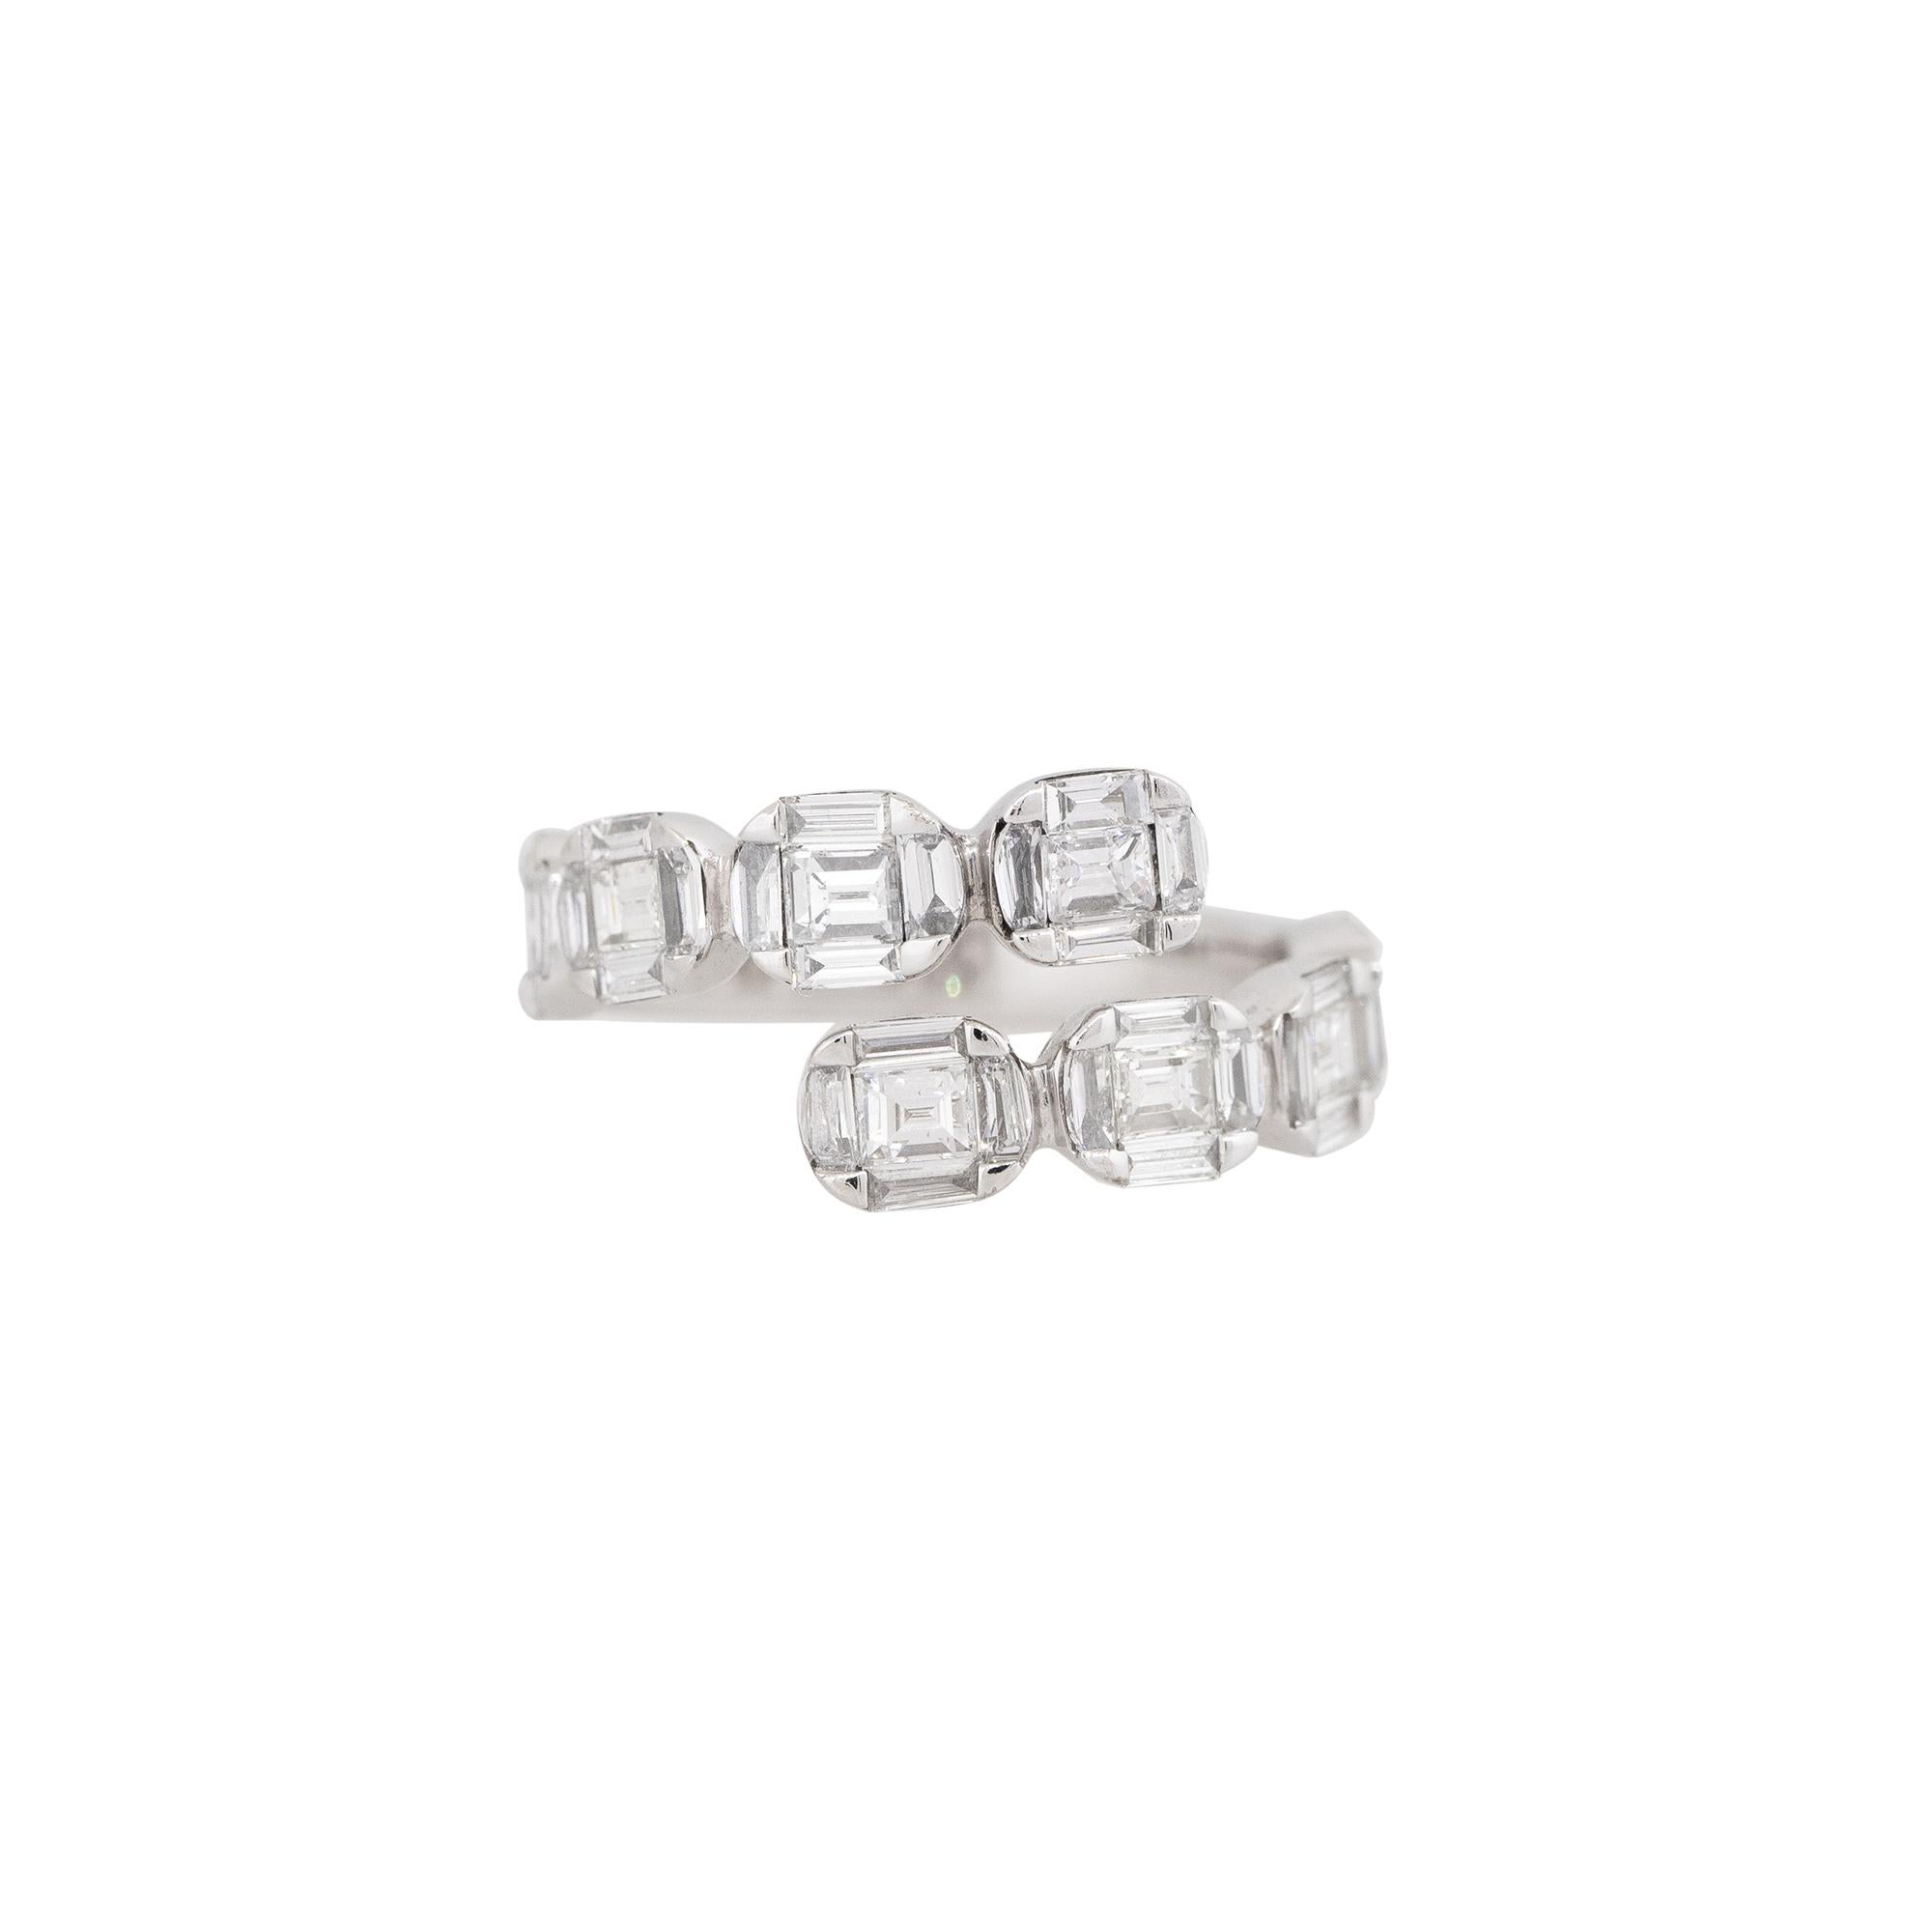 18k White Gold 1.96ctw Diamond Mosaic Bypass Ring

Product: Mosaic Diamond Bypass Ring
Material: 18k White Gold
Diamond Details: There are approximately 1.96 carats of Baguette cut diamonds (65 stones)
Diamond Clarity: Diamonds are approximately